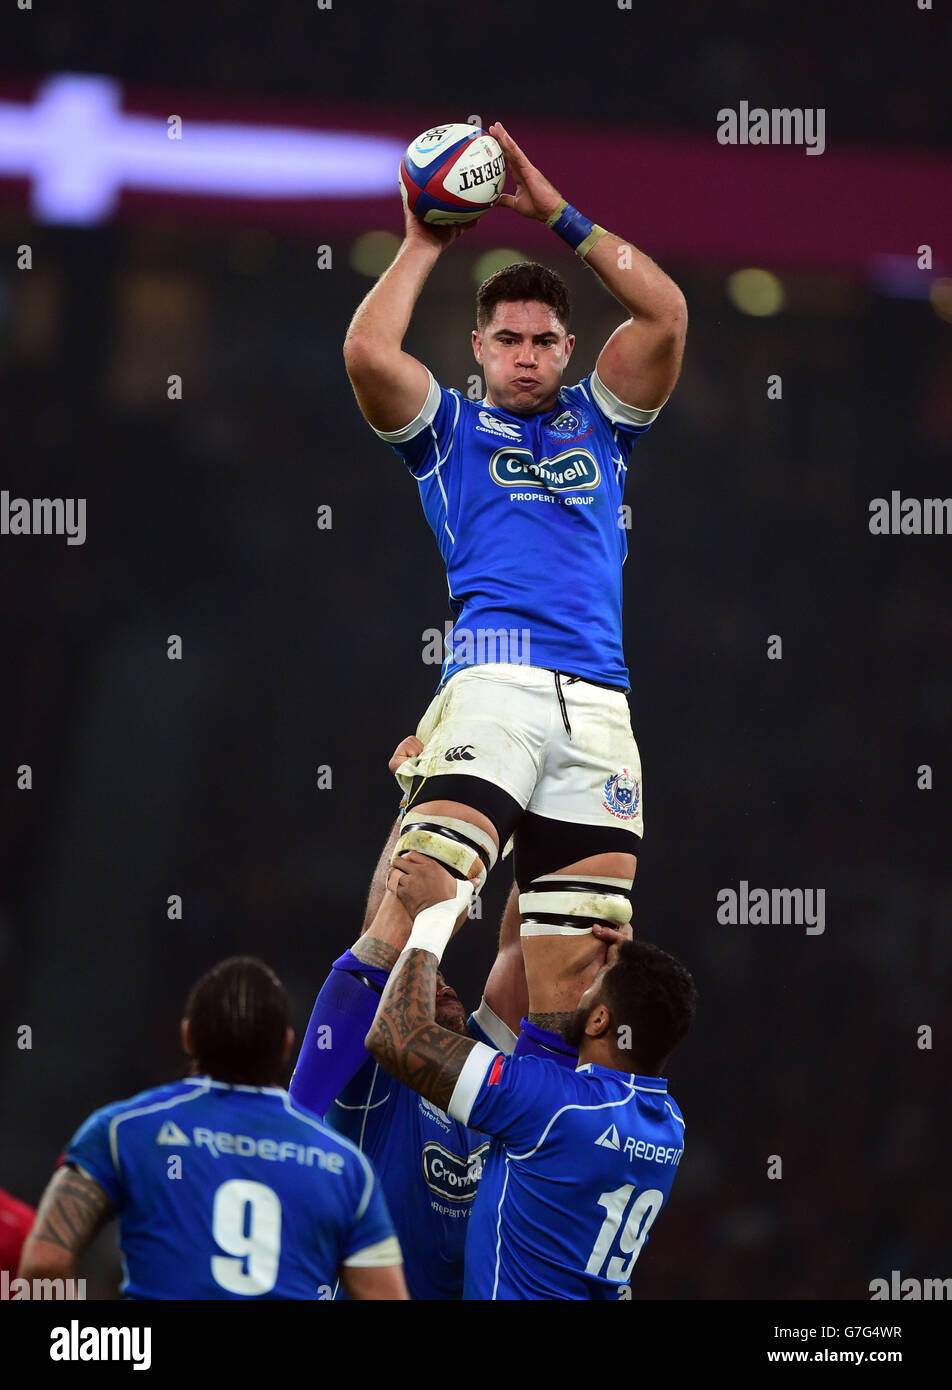 Samoa's Daniel Leo during the QBE International match at Twickenham, London. PRESS ASSOCIATION Photo. Picture date: Saturday November 22, 2014. See PA Story RUGBYU England. Photo credit should read: Adam Davy/PA Wire. Stock Photo